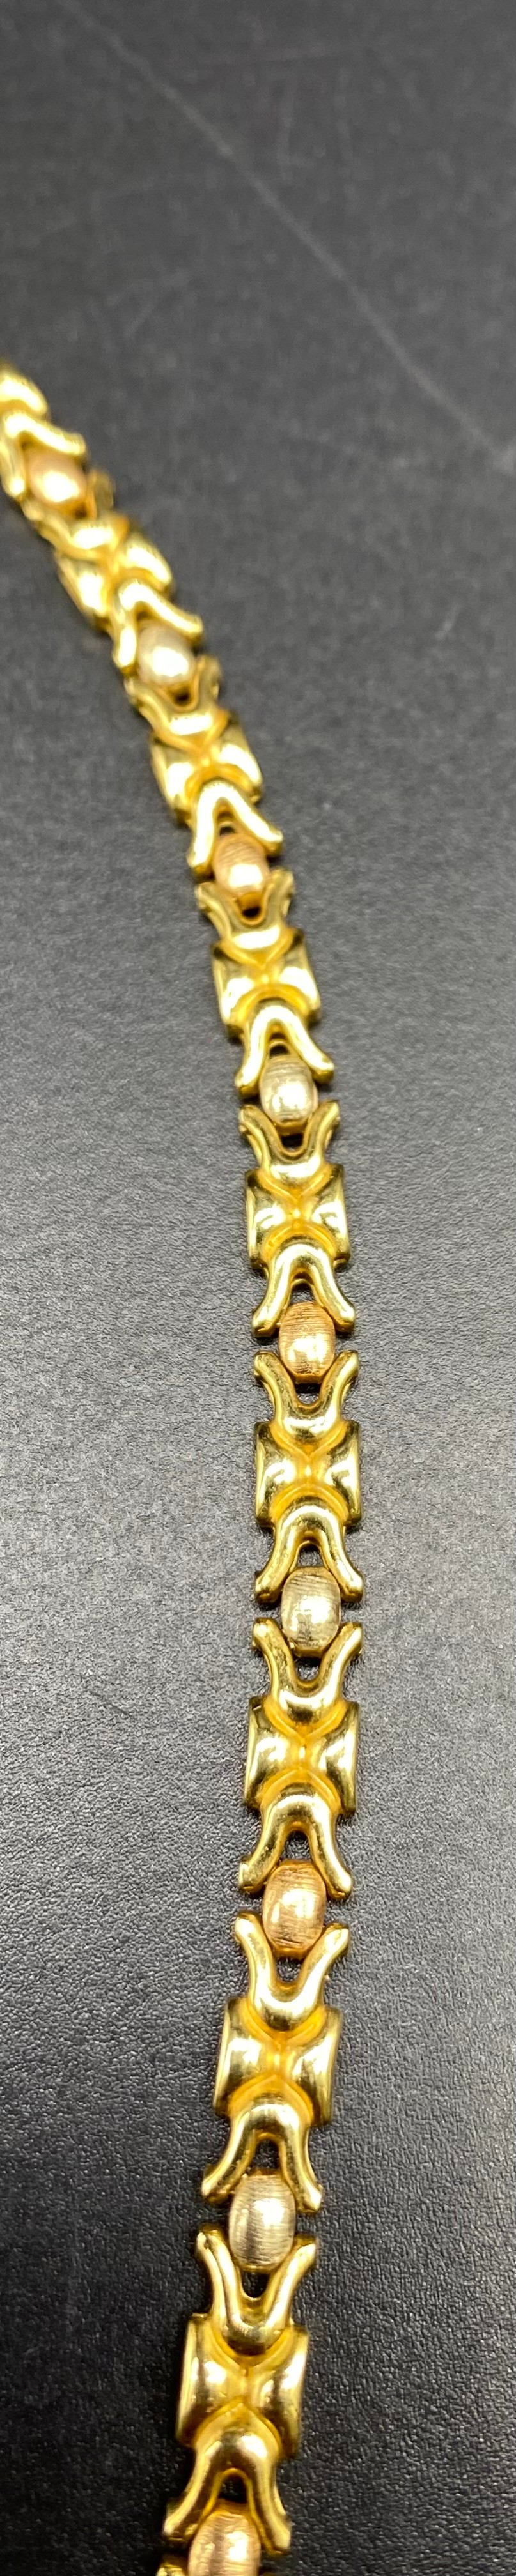 18ct gold 750 hall marked heavy fancy linked necklace [19.22] grams - Image 3 of 4